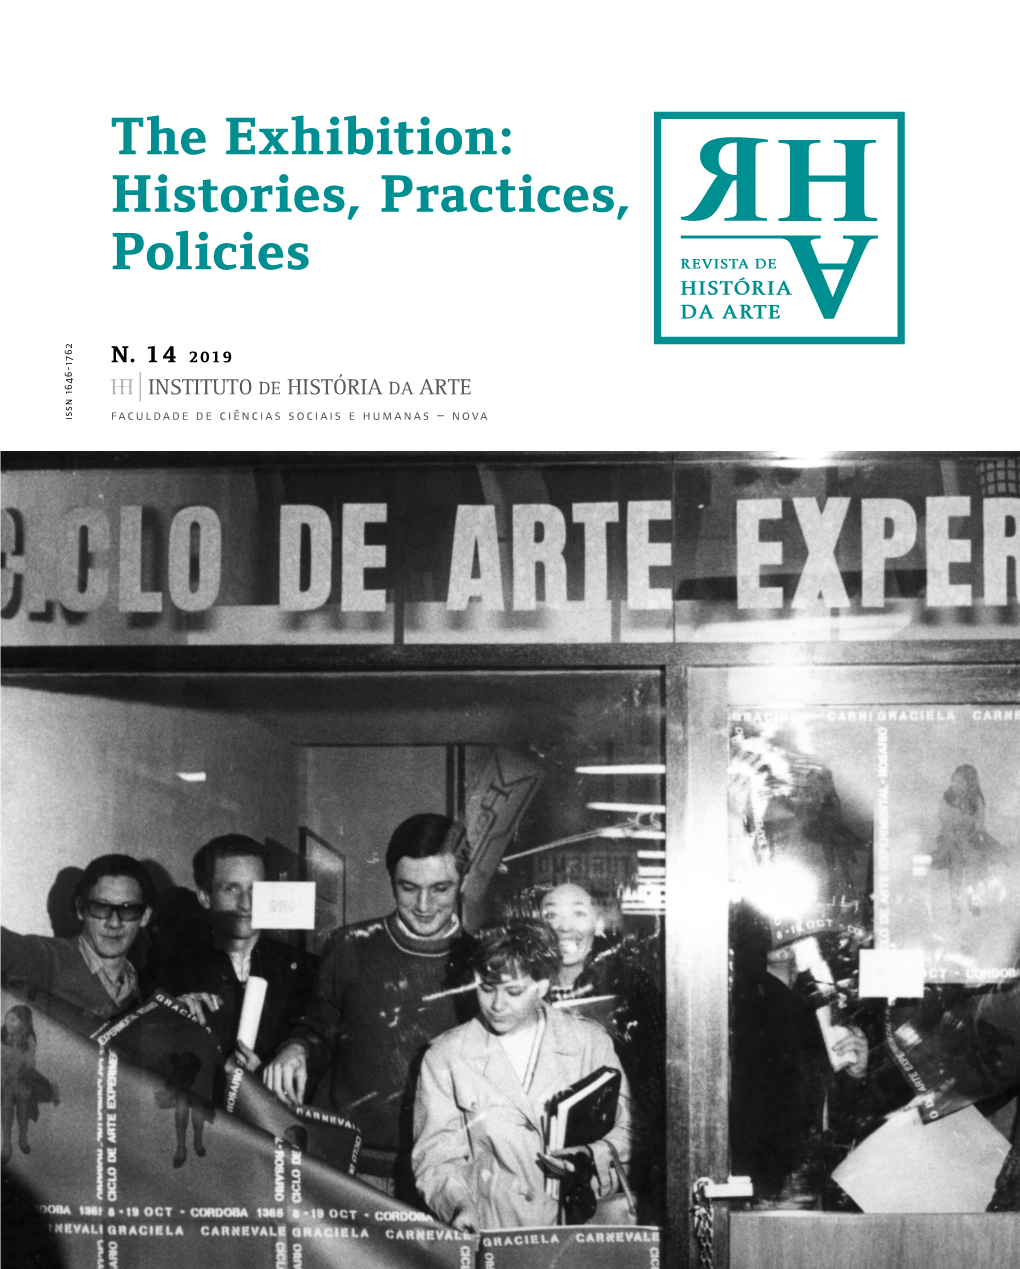 The Exhibition: Histories, Practices, Policies